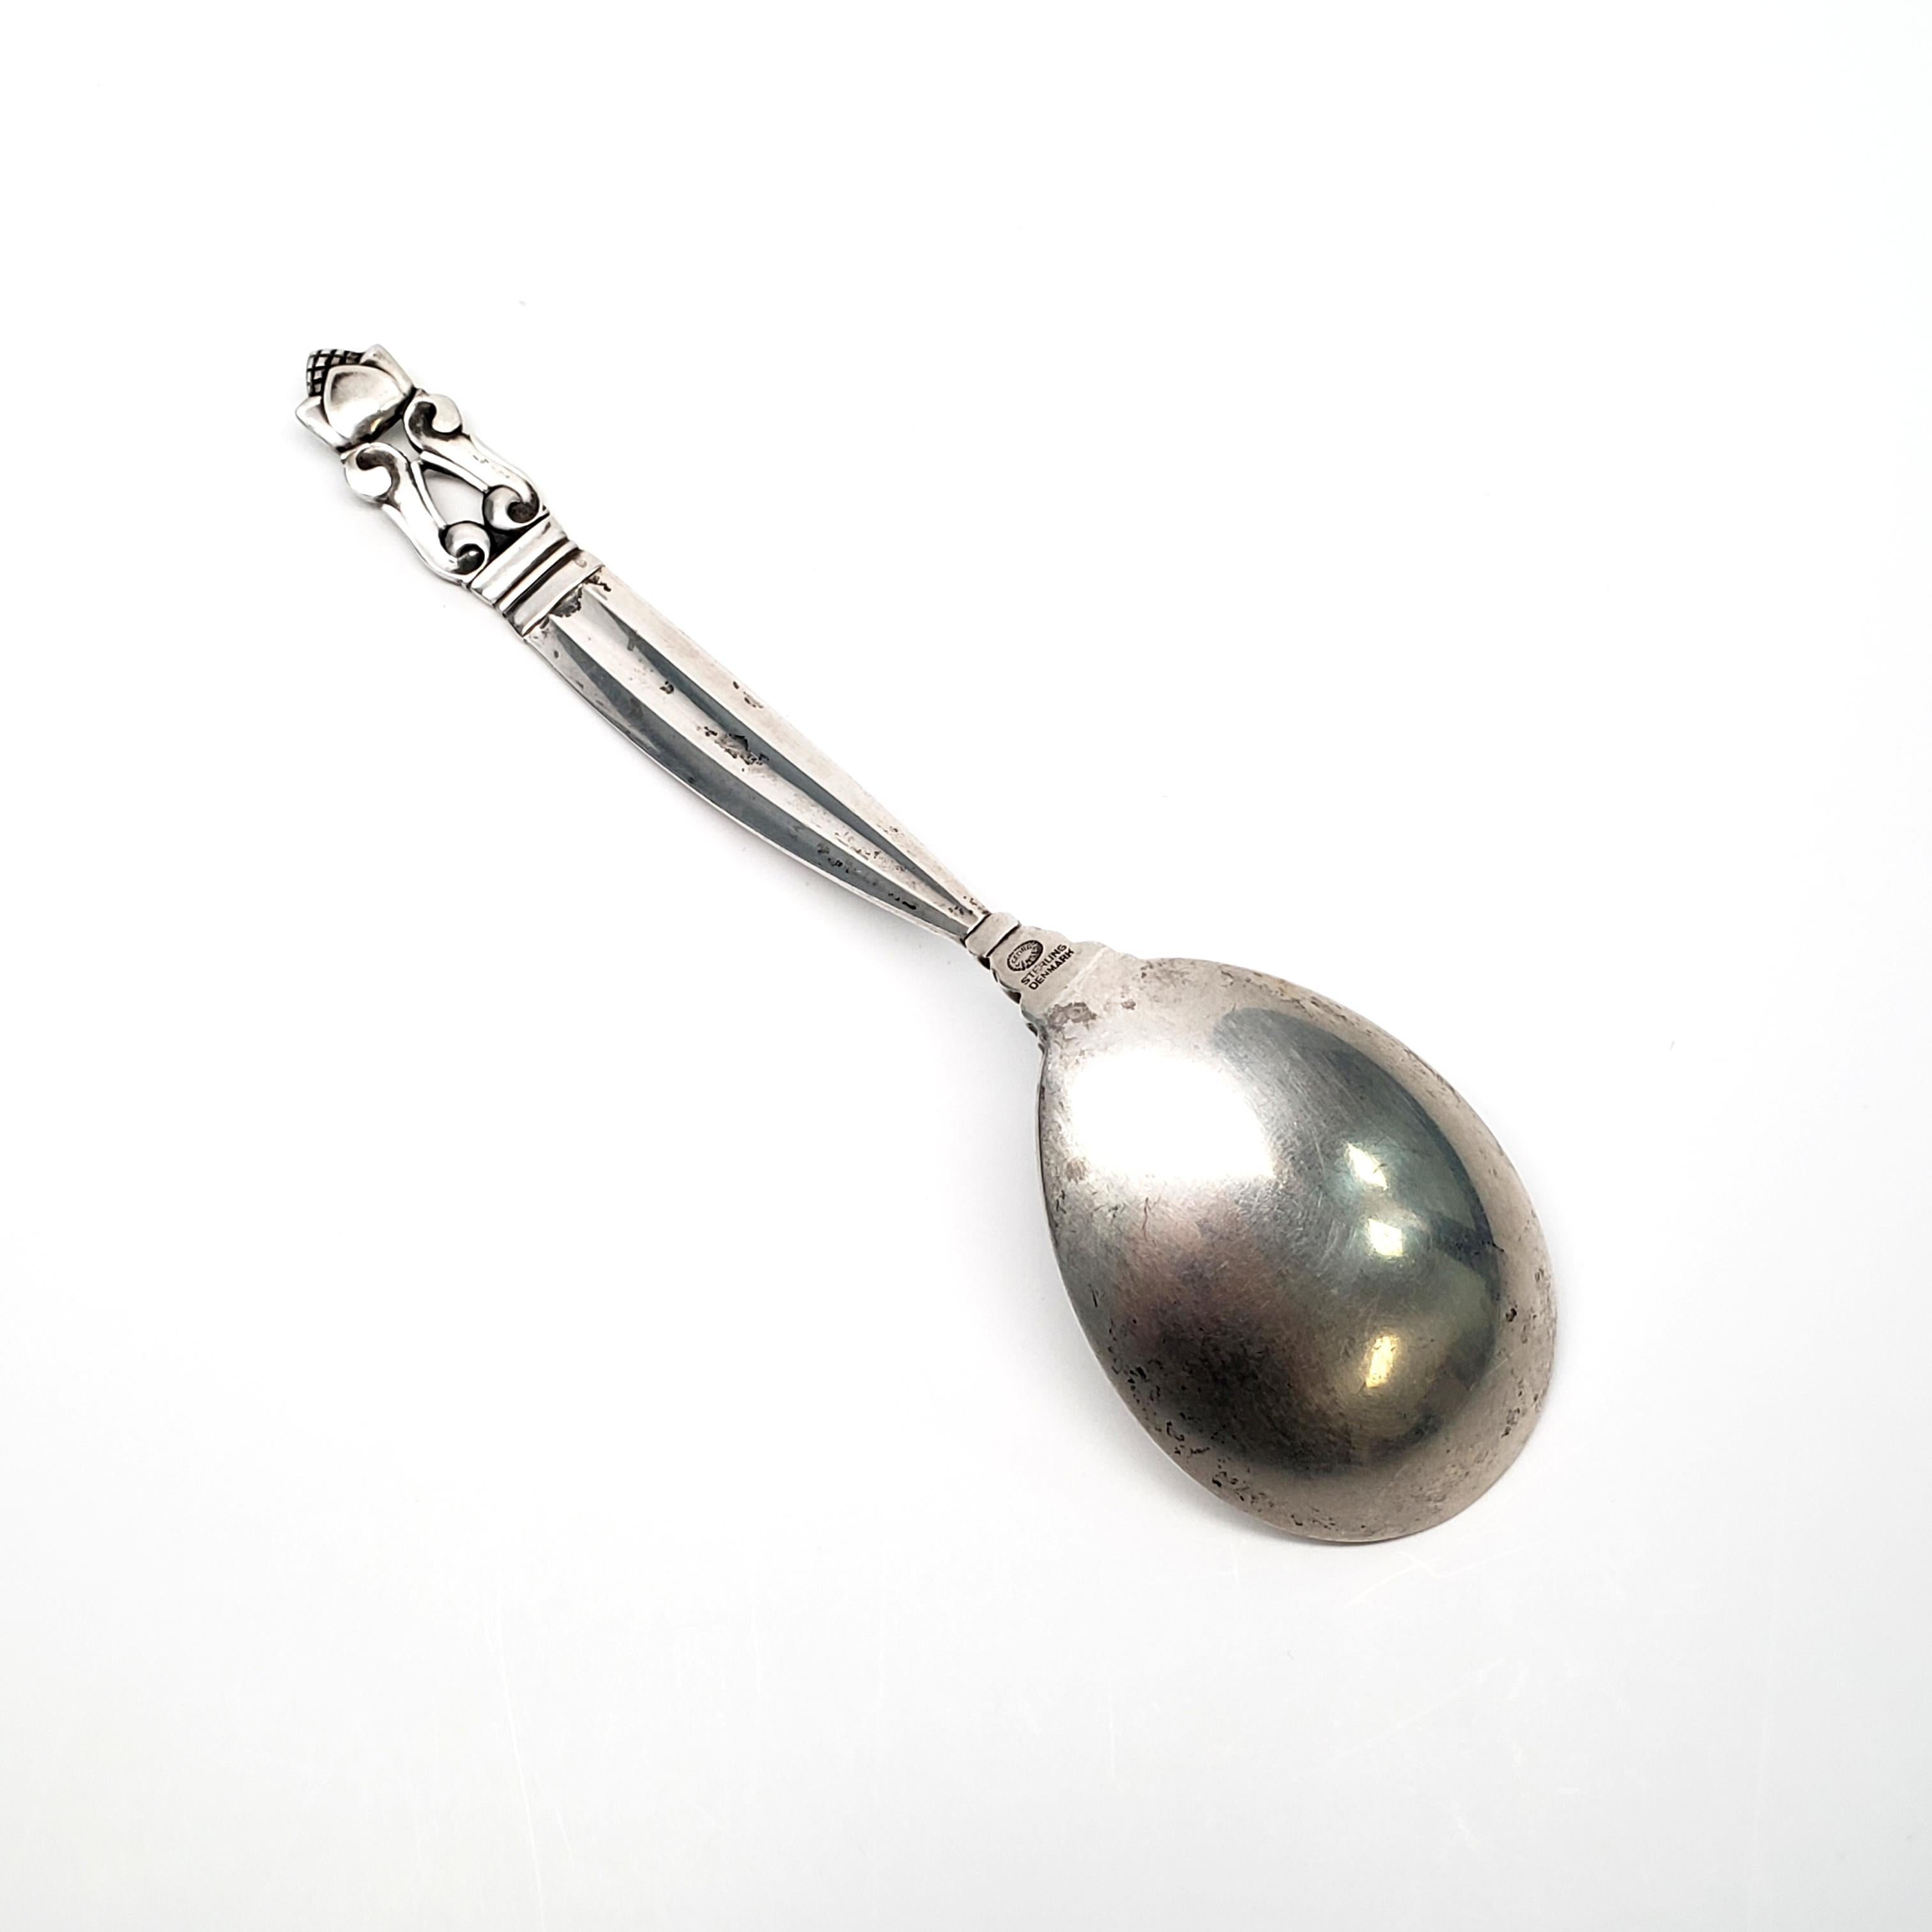 Vintage sterling silver curved handle jam spoon from Georg Jensen in the Acorn pattern. The Acorn pattern was introduced in 1915 as a collaboration between Georg Jensen and designer Johan Ronde. The pattern combines Art Nouveau and Art Deco styles,